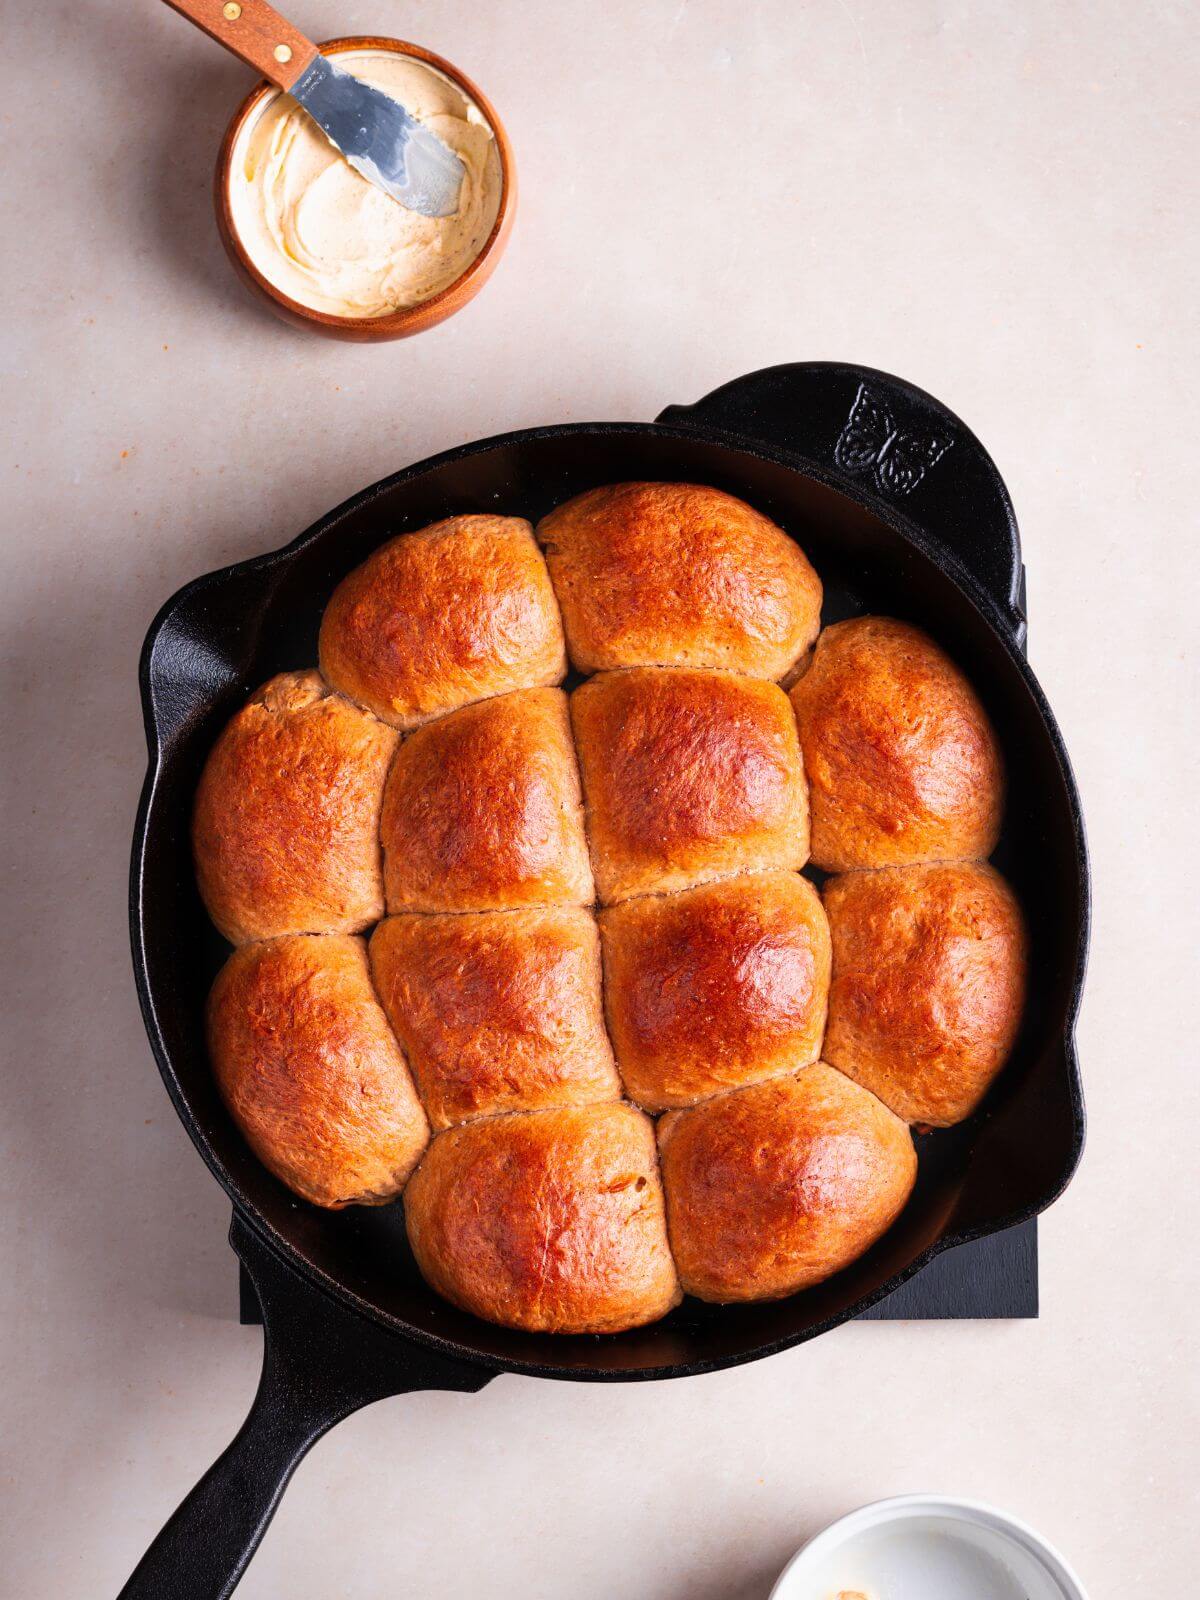 Banana yeast bread rolls in a cast iron pan.